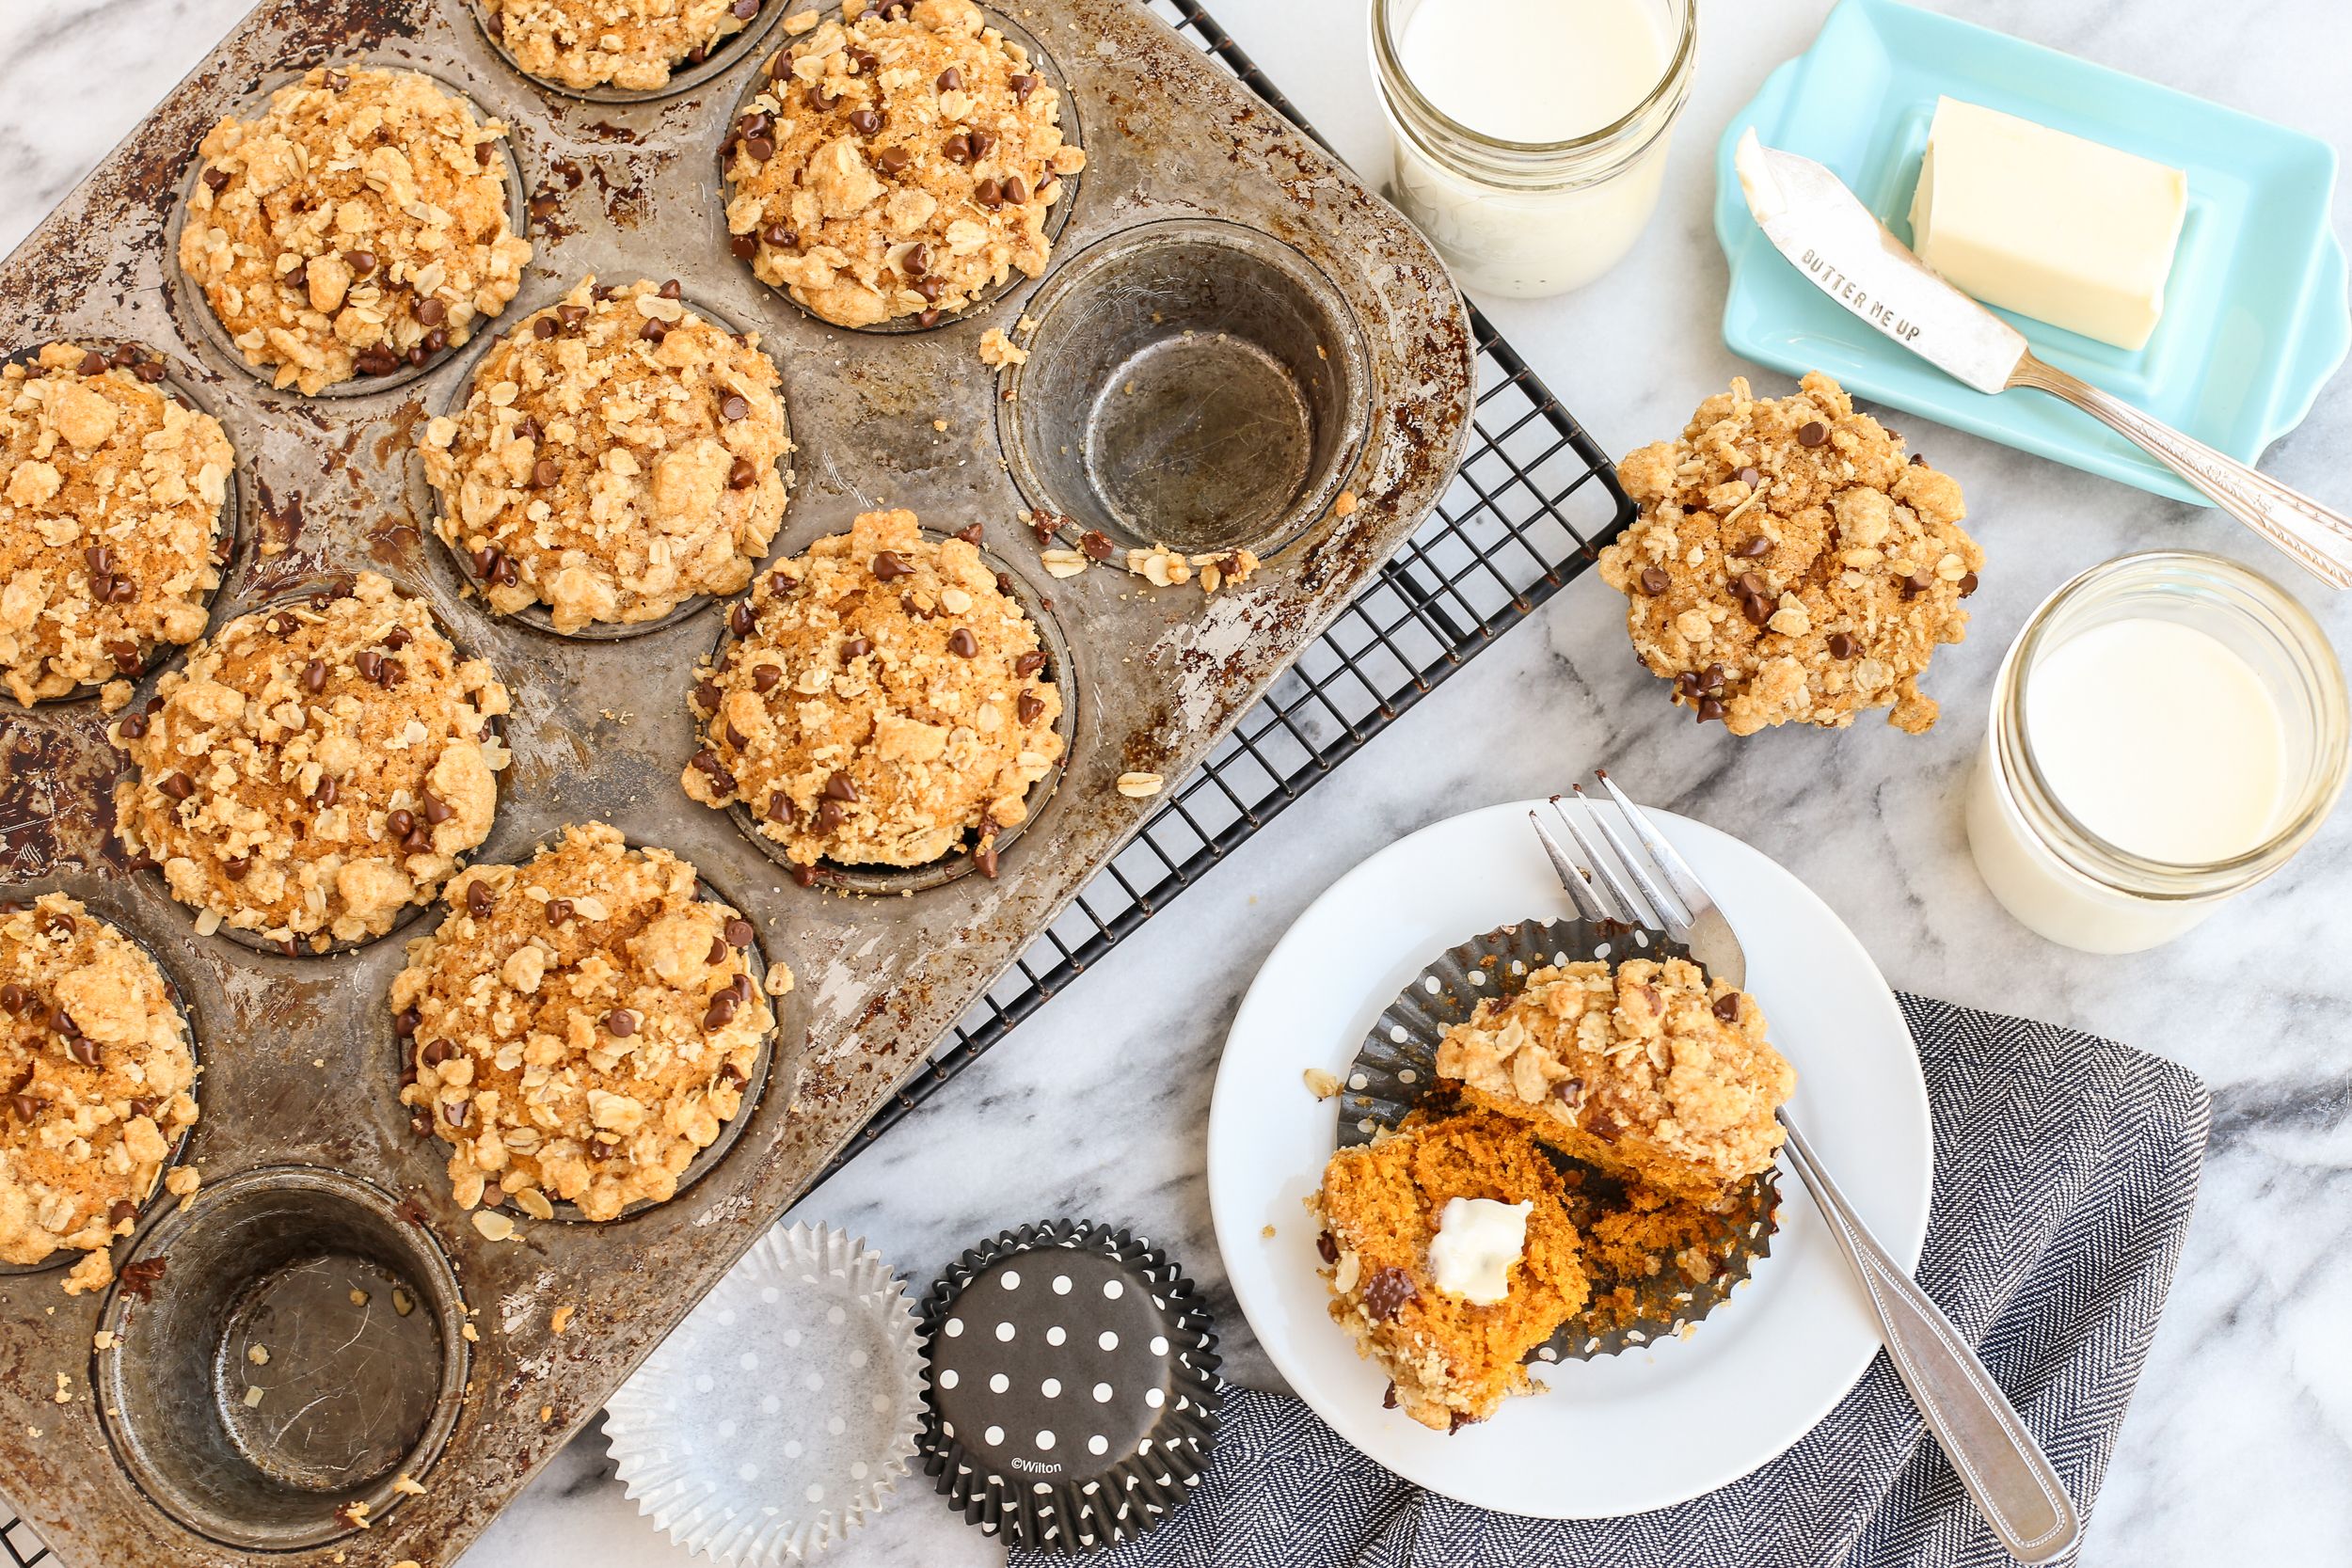 https://hips.hearstapps.com/thepioneerwoman/wp-content/uploads/2015/11/pumpkin-muffins-with-oats-and-chocolate-streusel-01.jpg